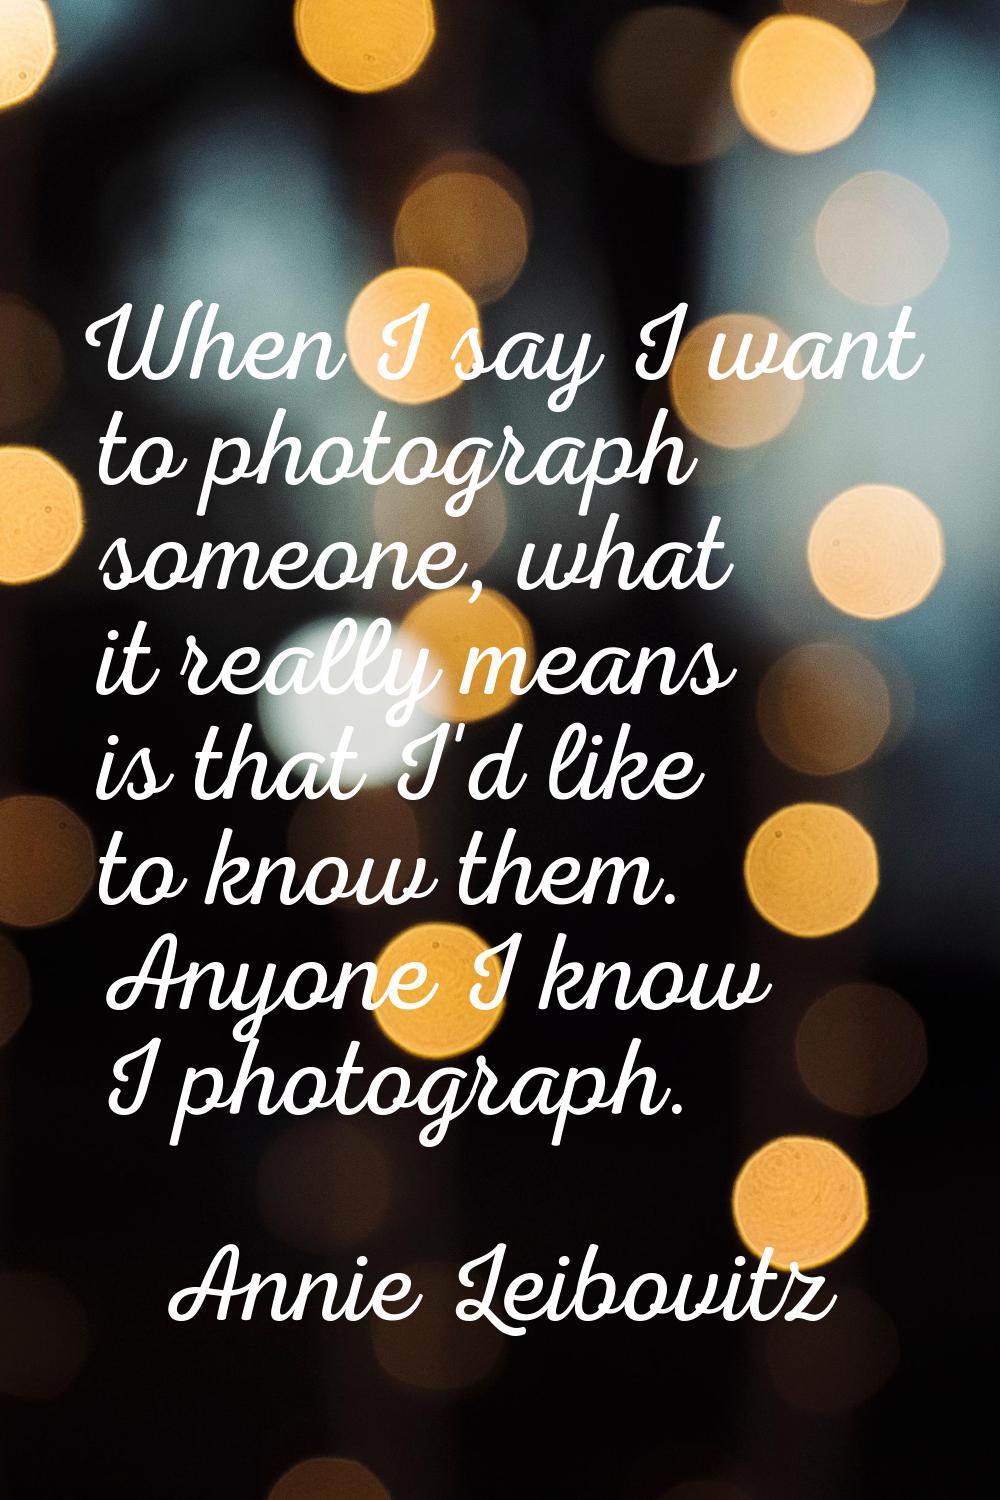 When I say I want to photograph someone, what it really means is that I'd like to know them. Anyone